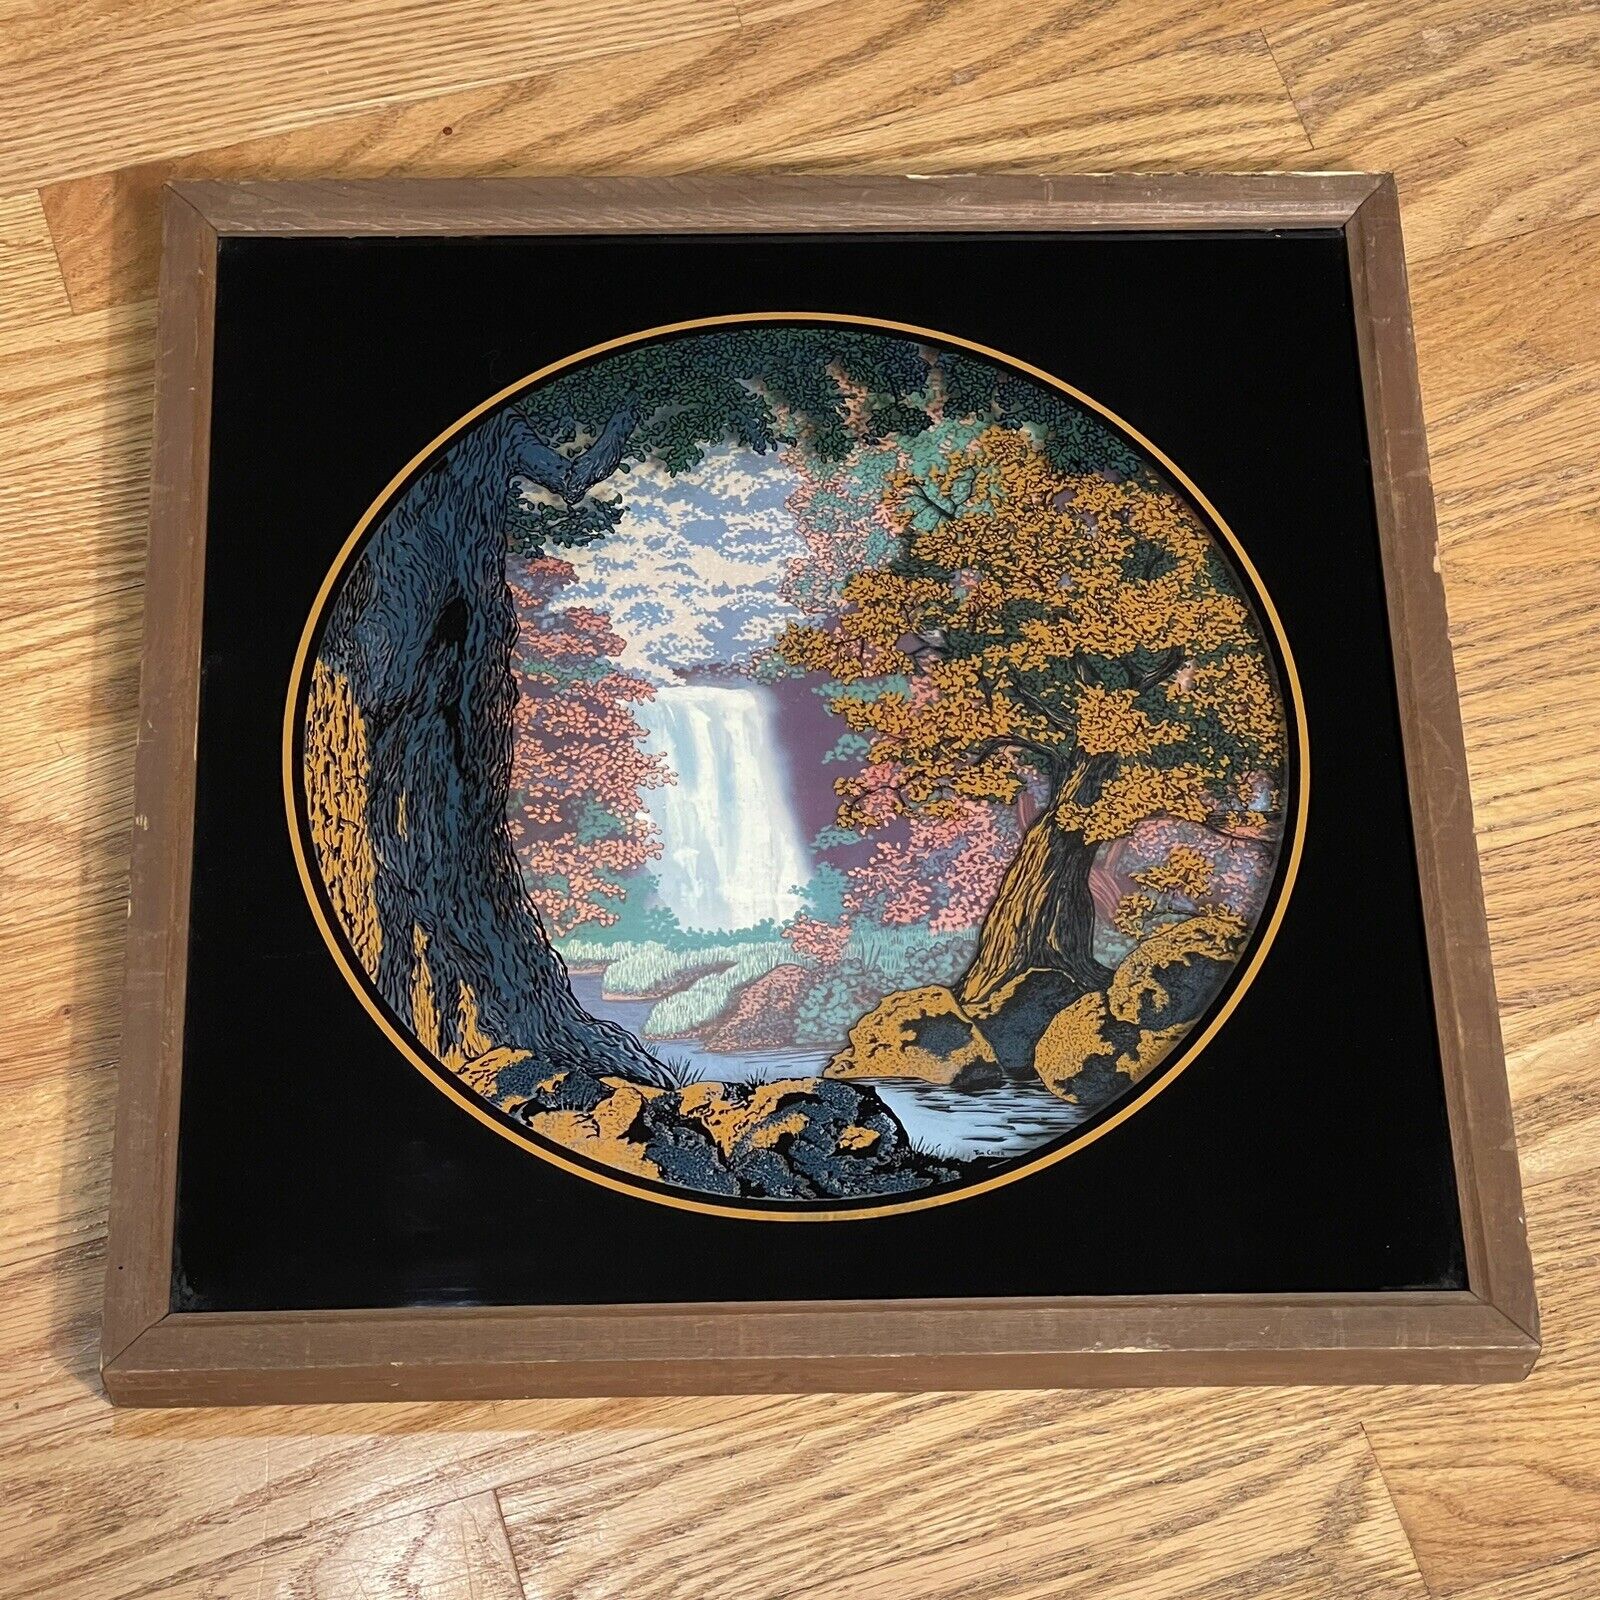 LULU'S RETRO 1960'S 70'S REVERSE PAINTED GLASS LANDSCAPE PICTURE SHADOW BOX